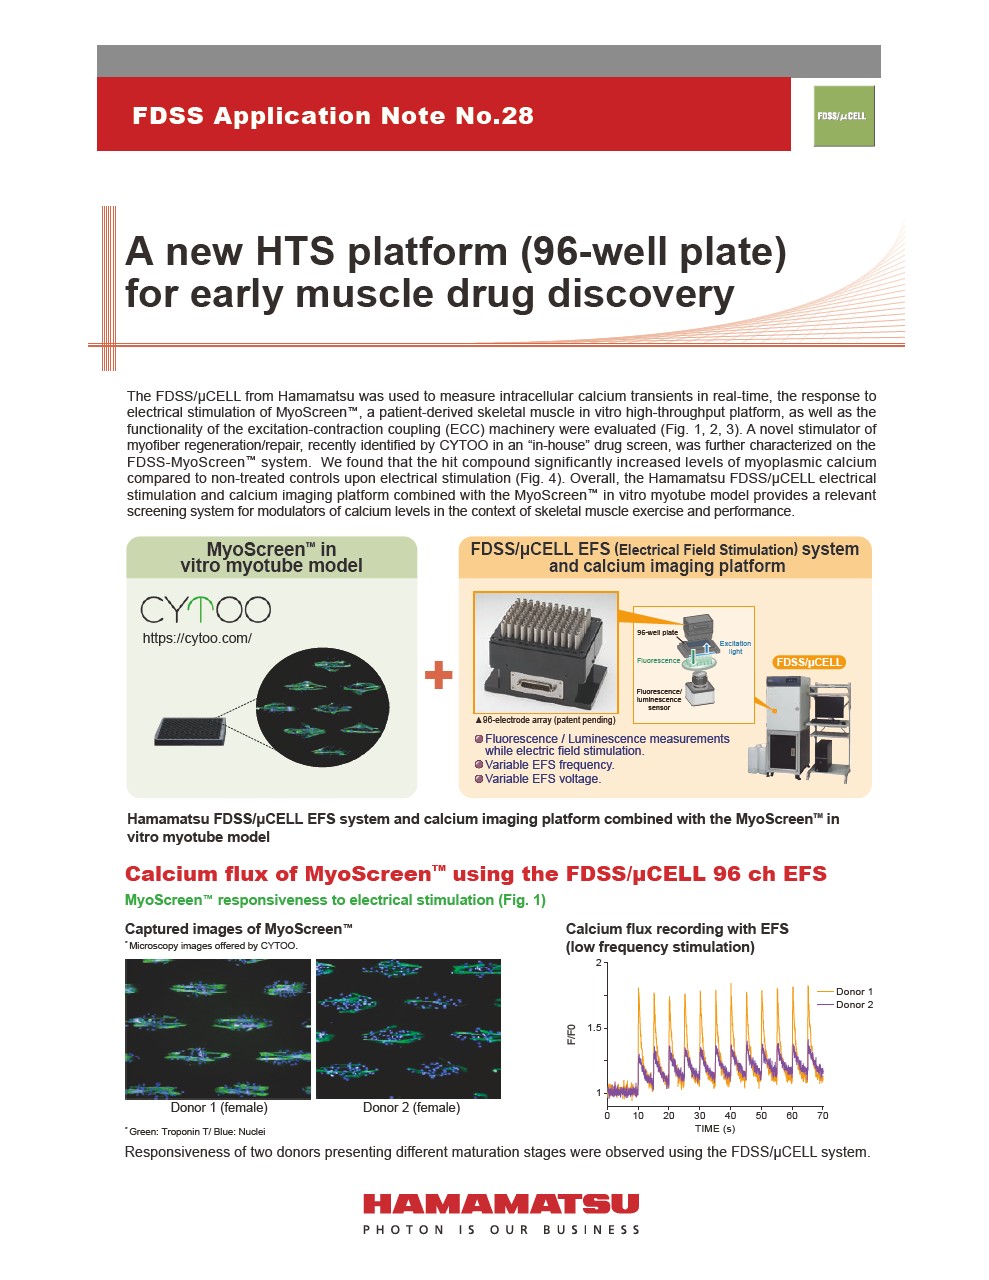 FDSS Application Note No.28 A new HTS platform (96-well plate) for early muscle drug discovery